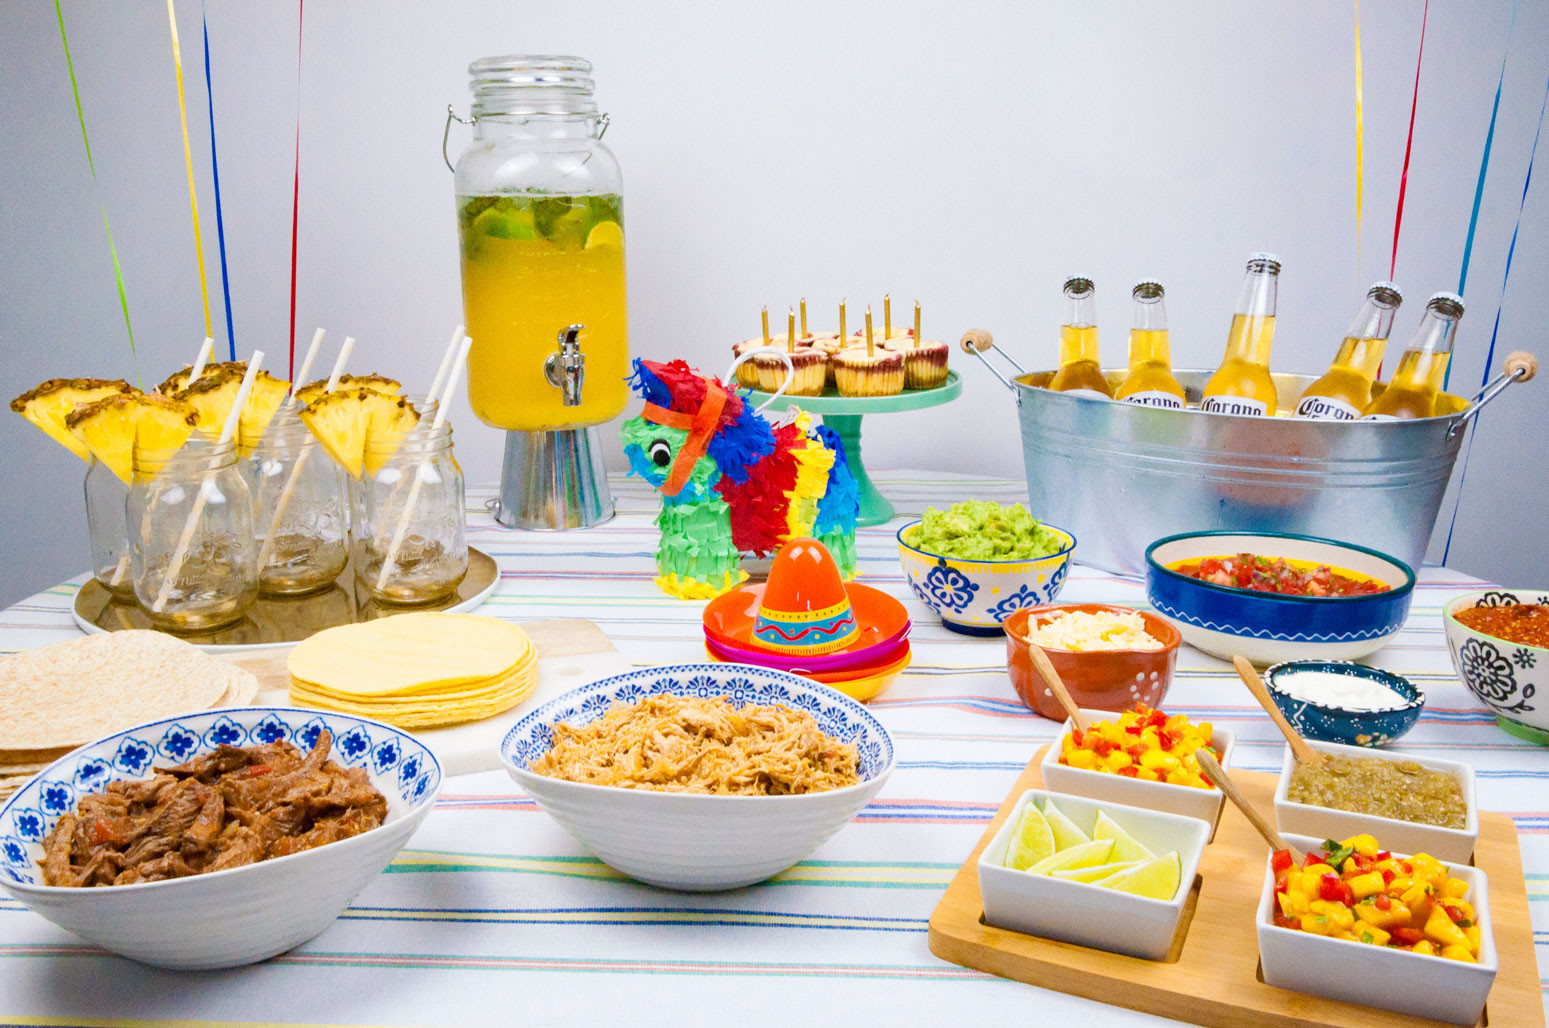 Taco Dinner Party Ideas
 Make Your Own Taco Party – the Spice at Home